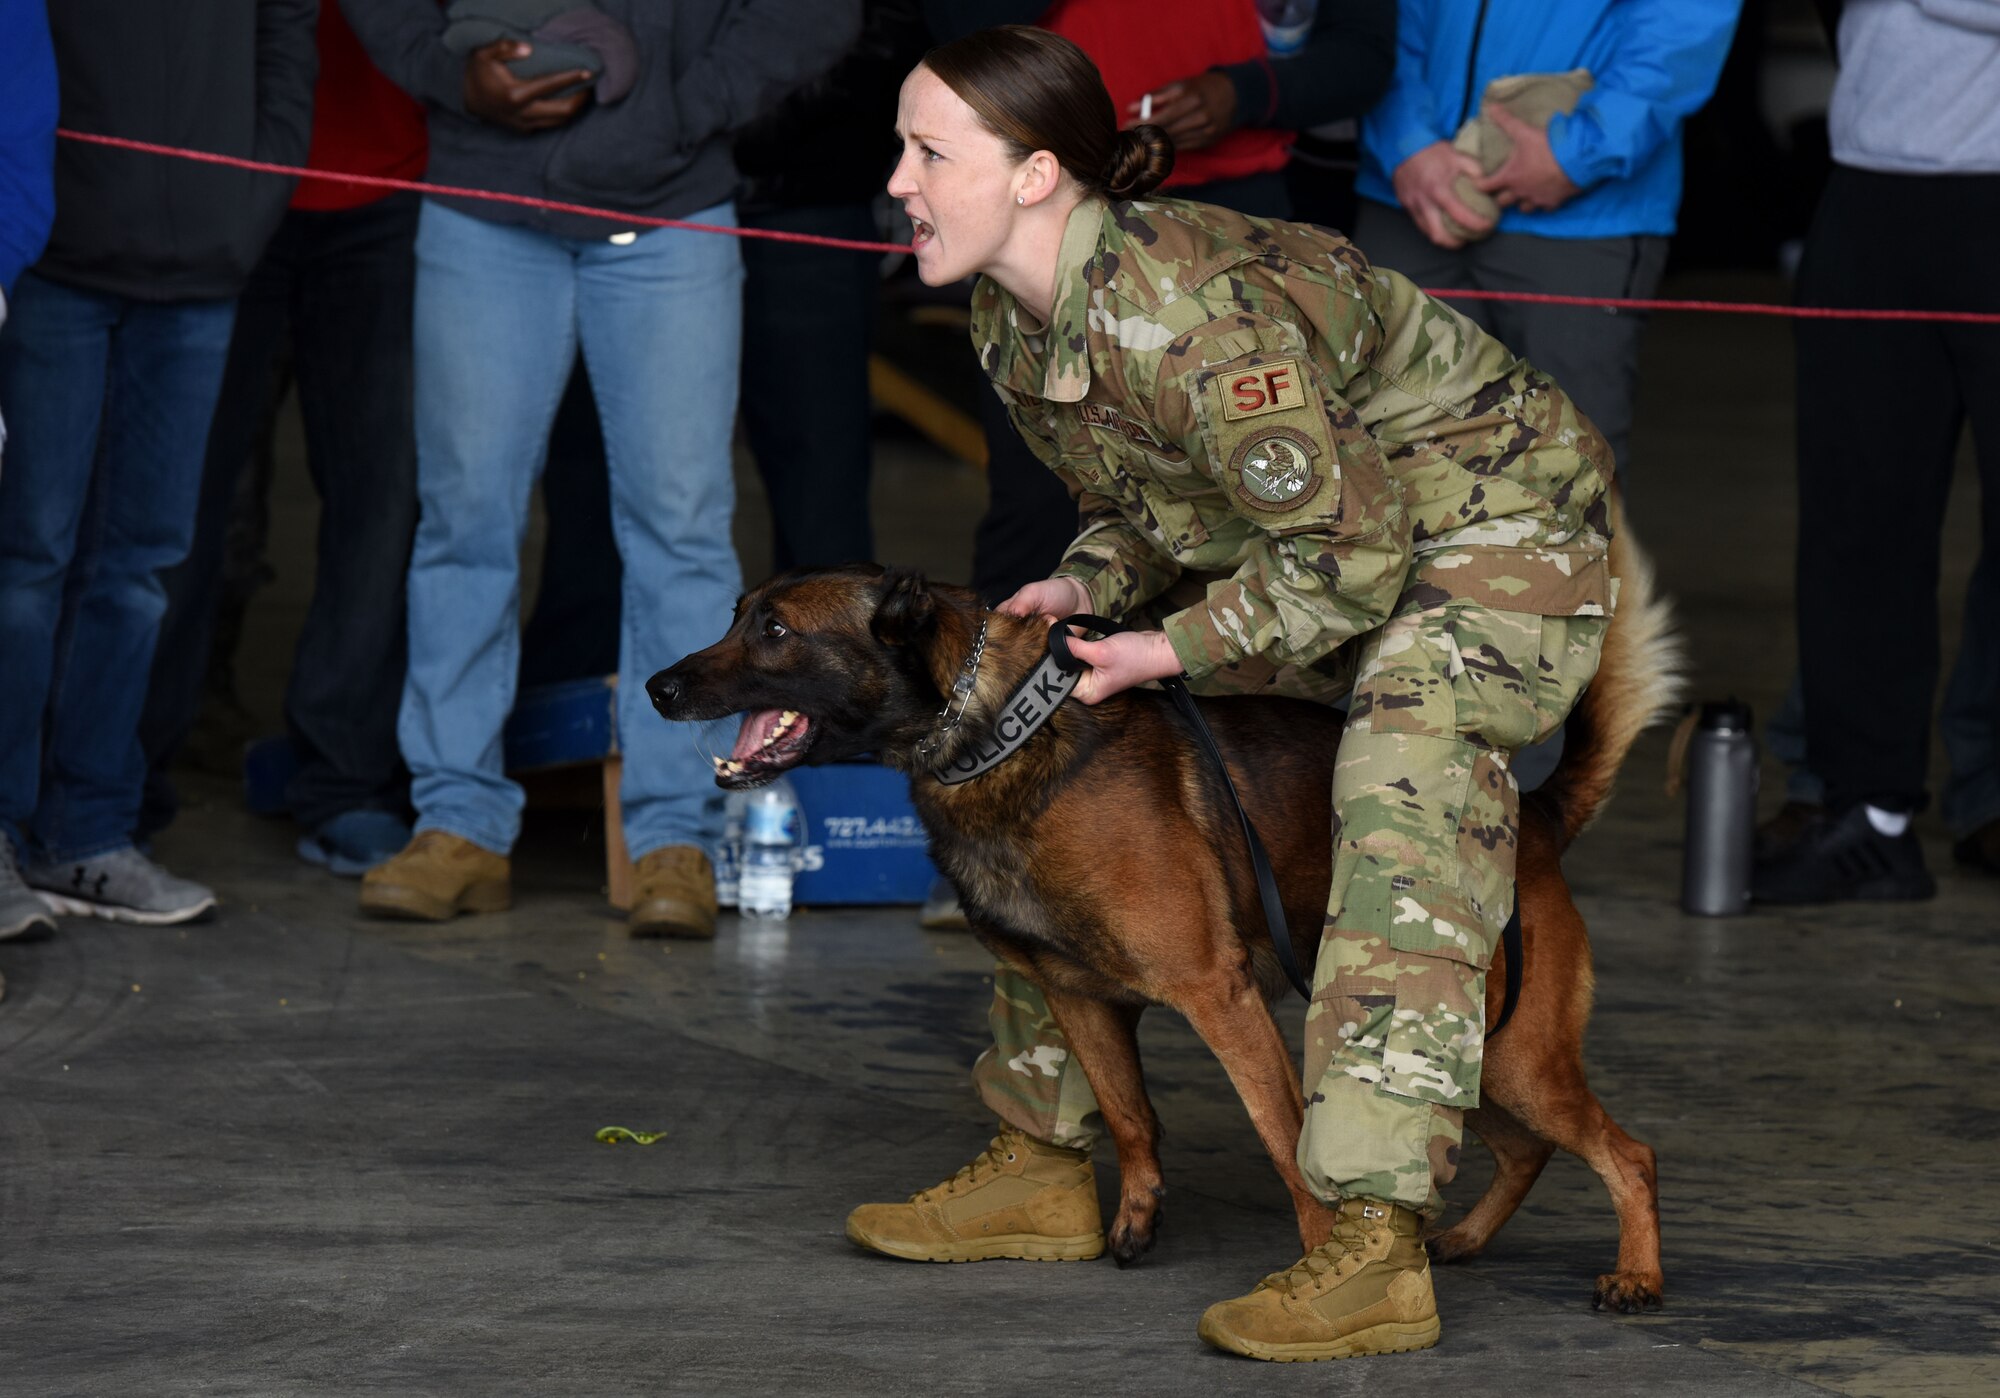 enior Airman Rachel Shetler, 39th Security Forces Squadron military working dog handler, gives verbal commands while restraining her MWD, Buck, during a K-9 demo at Airman Appreciation Day, March 29, 2019, at Incirlik Air Base, Turkey.